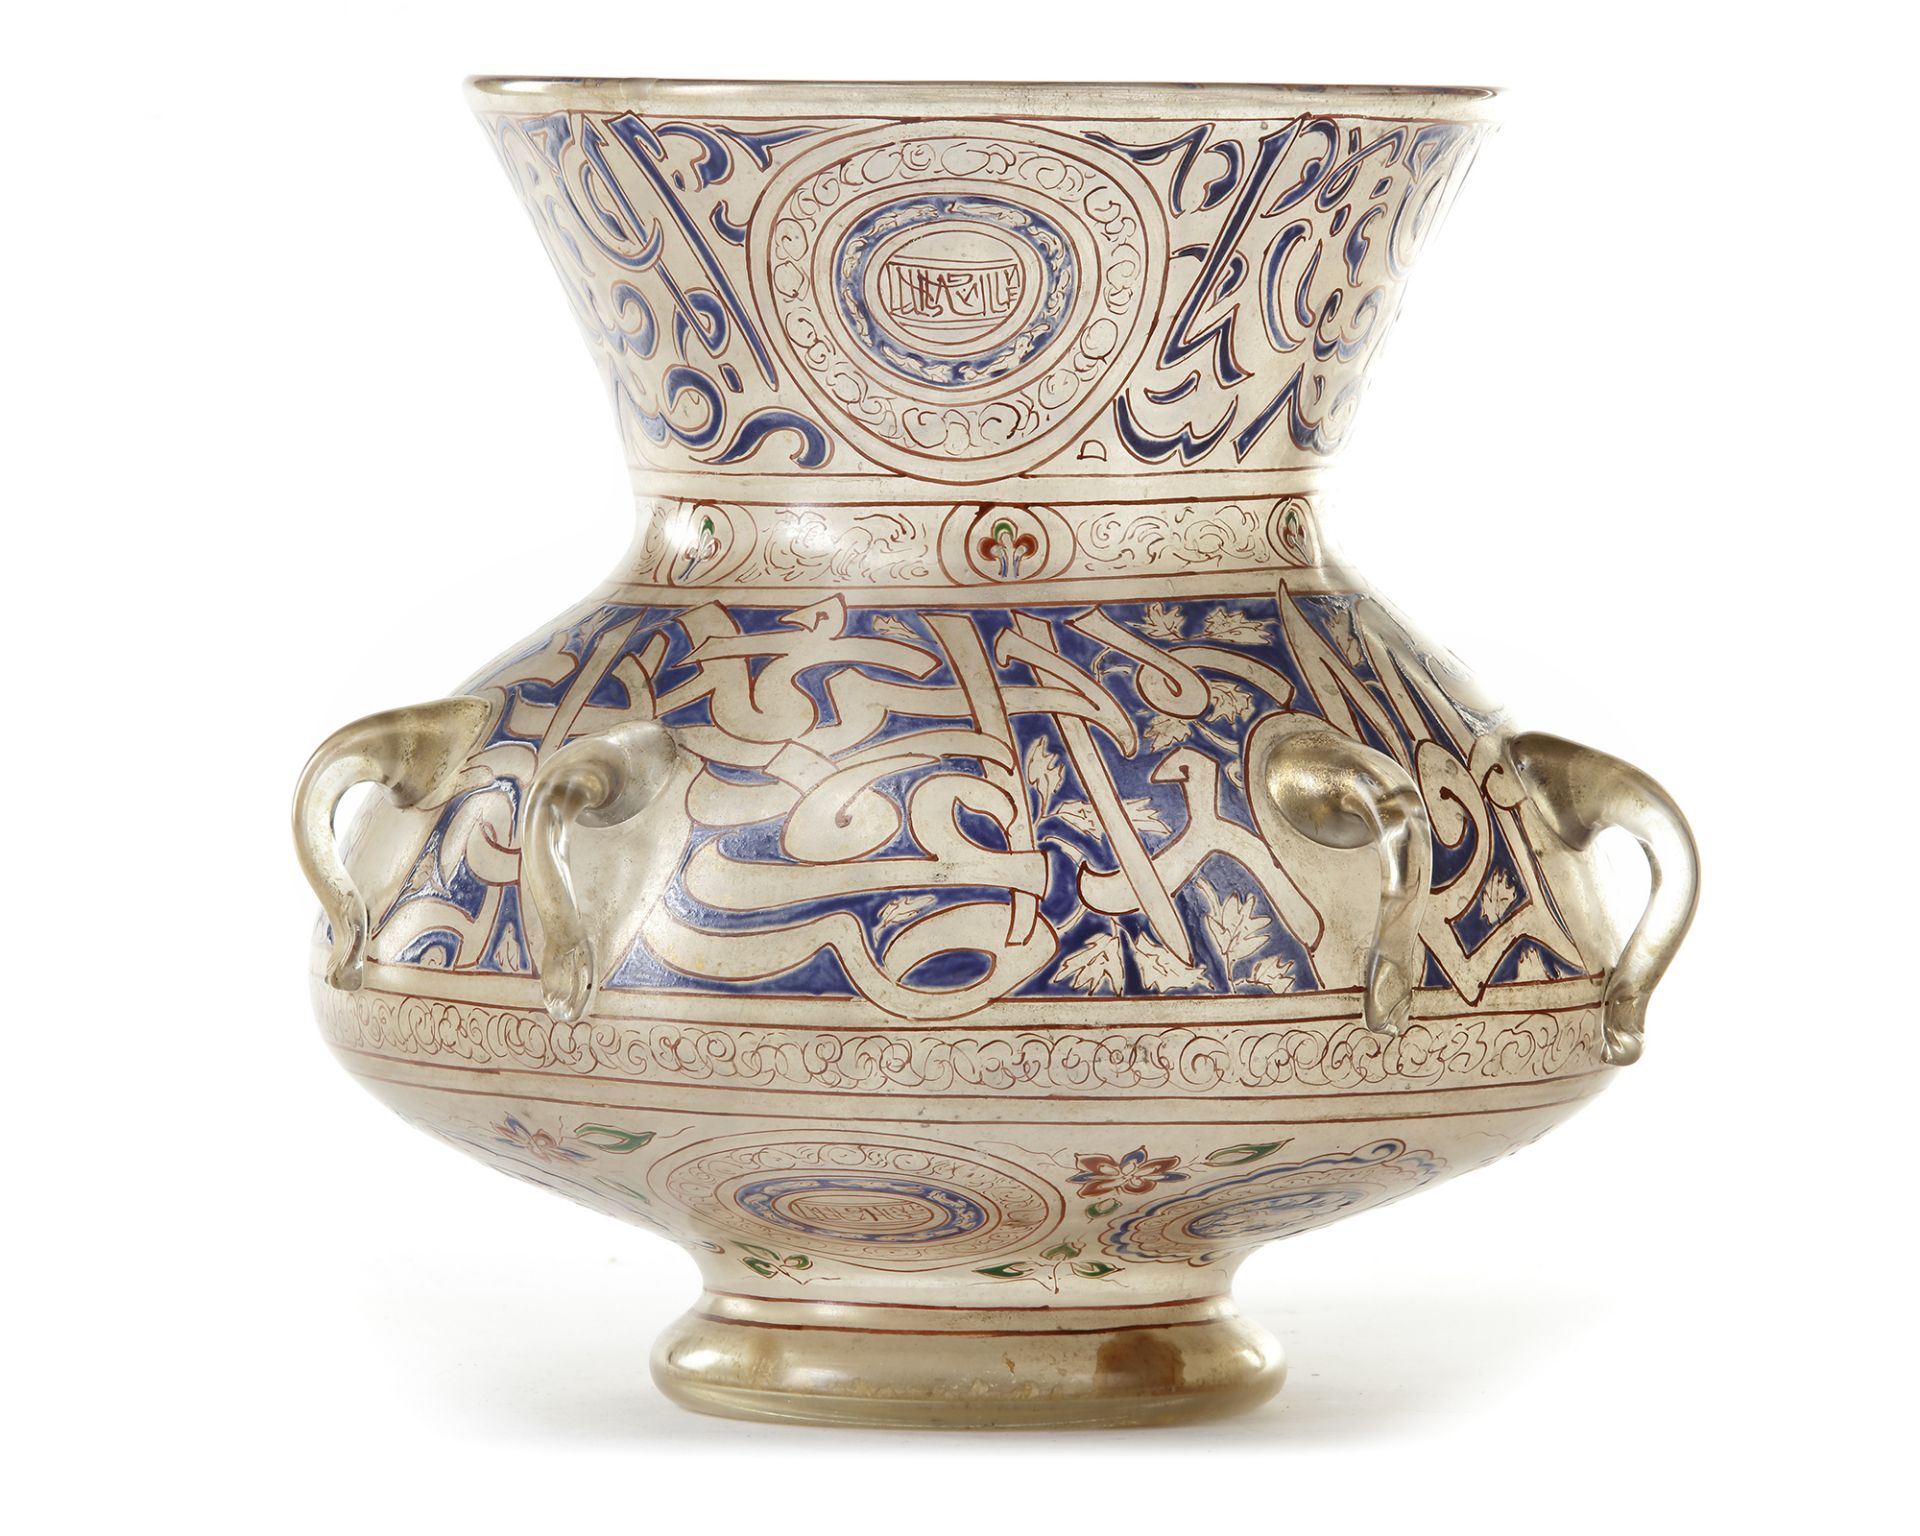 A MAMLUK-STYLE ENAMELLED CLEAR GLASS MOSQUE LAMP POSSIBLY BROCARD, FRANCE, SECOND HALF 19TH CENTURY - Image 4 of 10